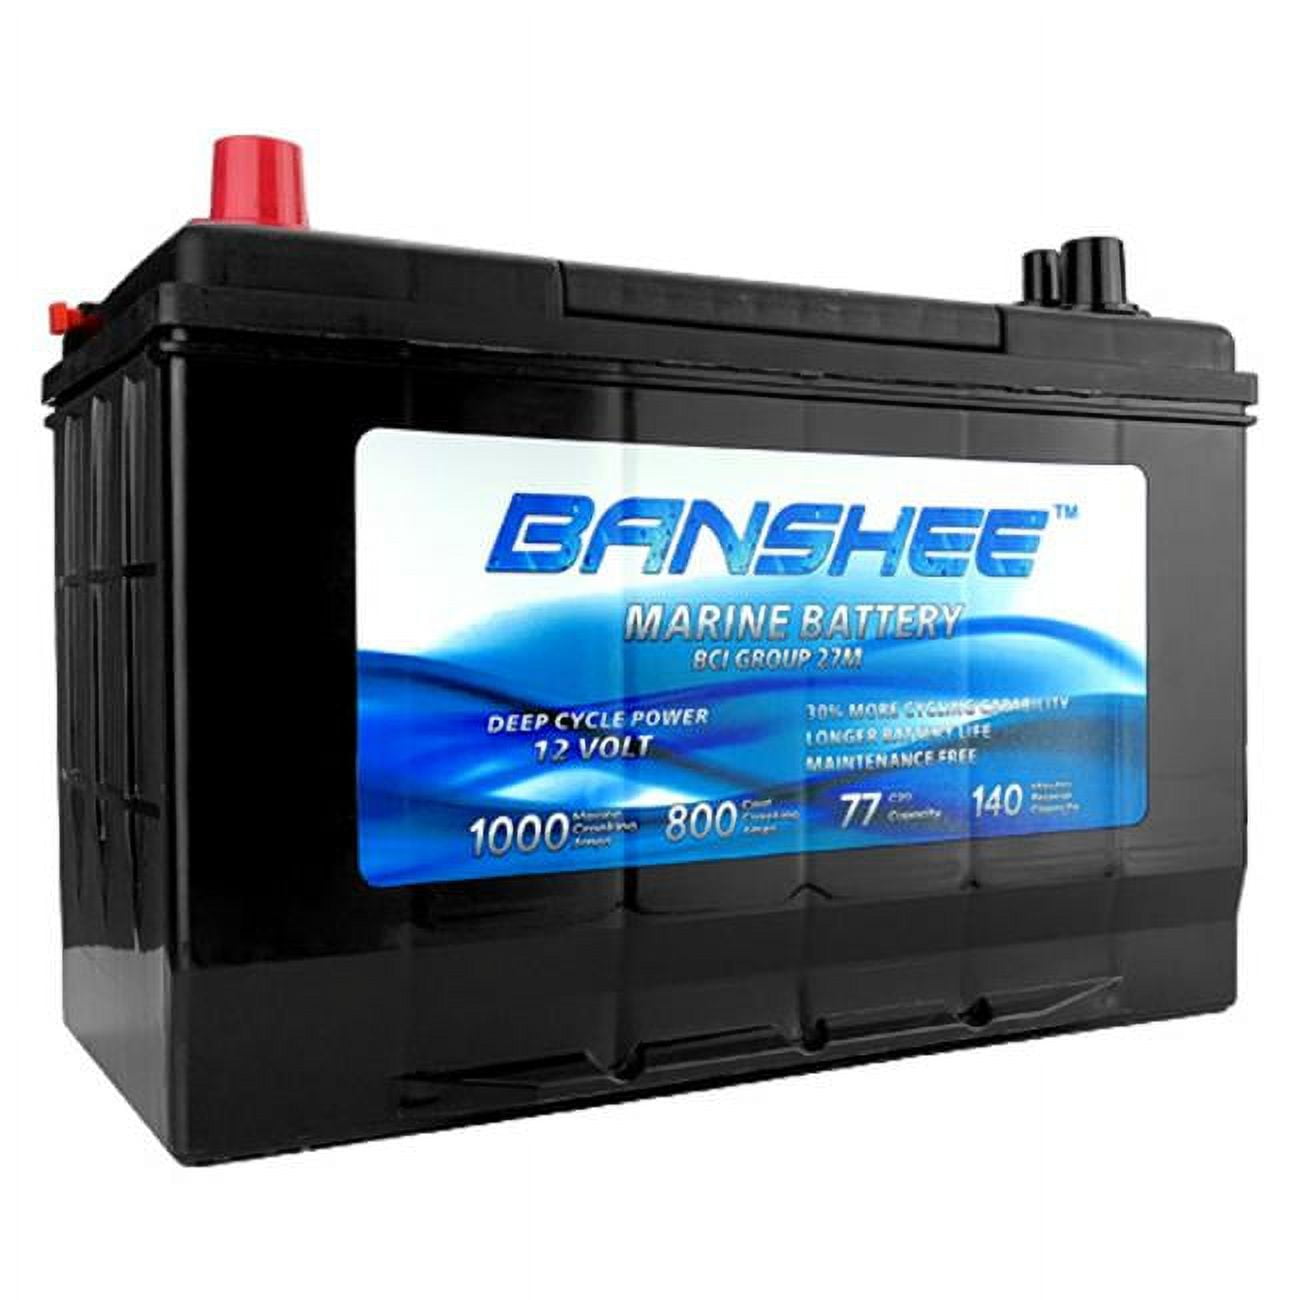 Picture of Banshee 27M-Banshee-04 Deep Cycle Marine Trolling Motor Battery for Replacement Optima D27M 8027-127 - Group Size 27